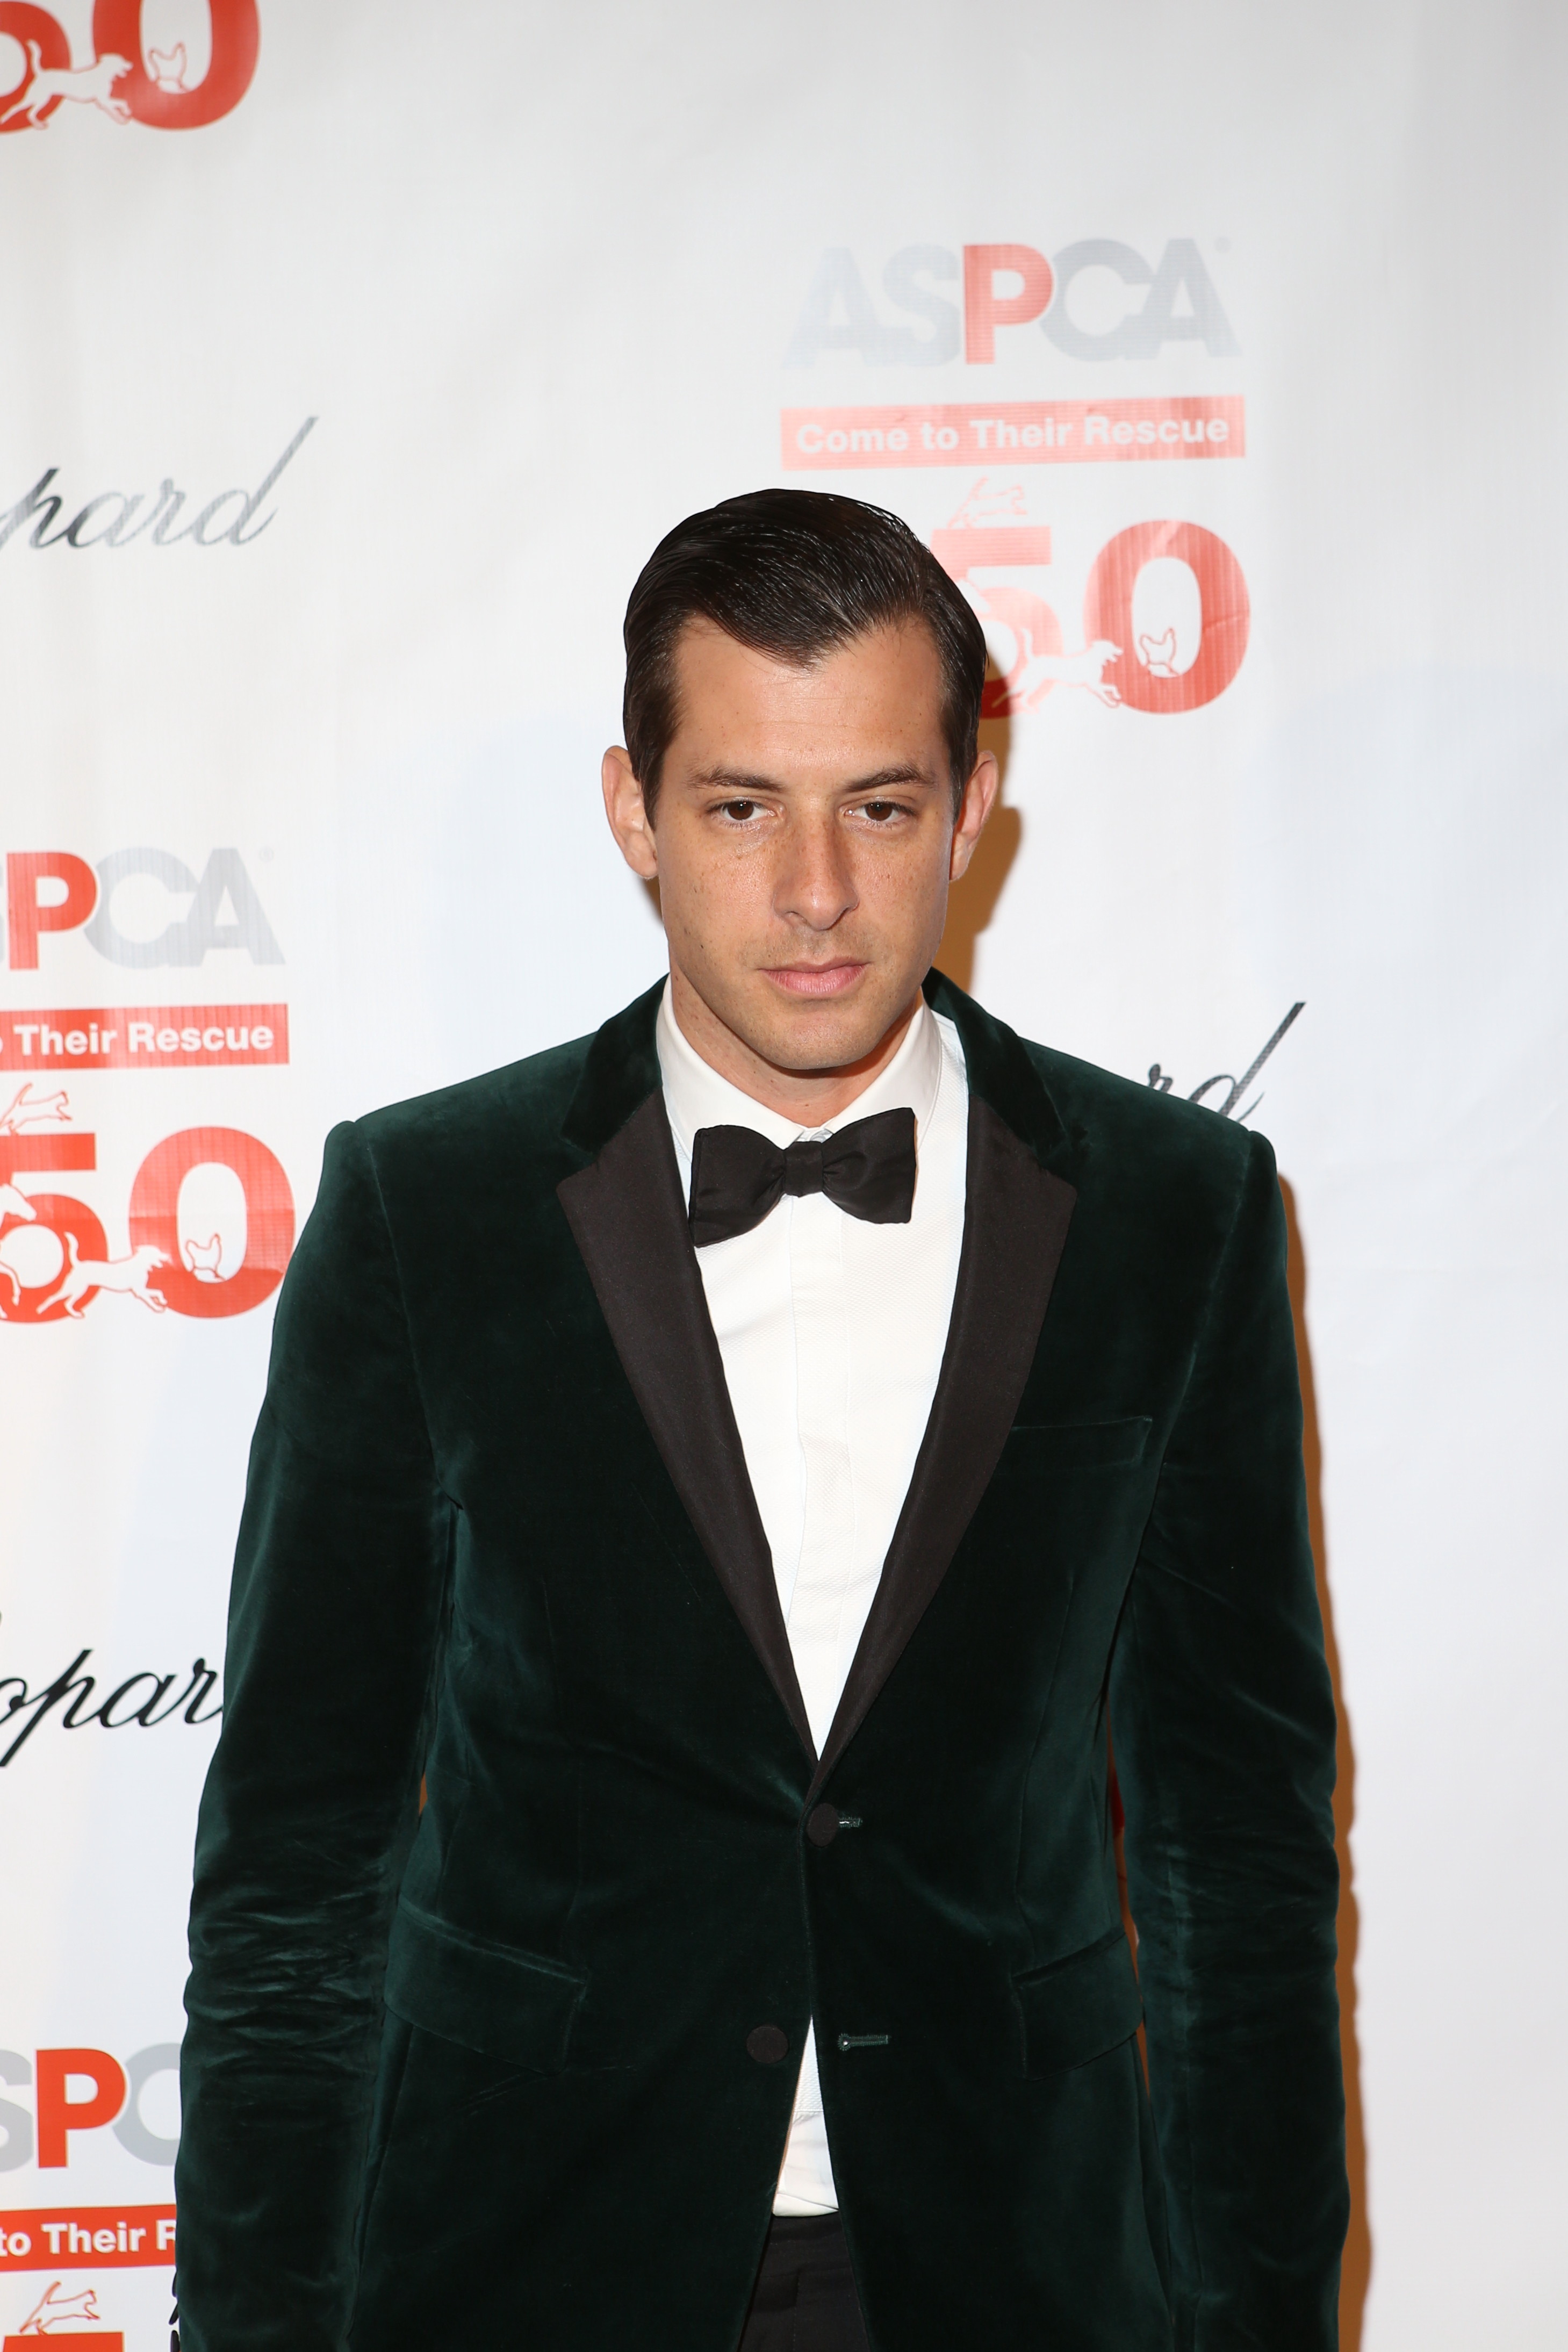 19th Annual ASPCA Bergh Ball at The Plaza Hotel Featuring: Mark Ronson Where: New York, New York, United States When: 14 Apr 2016 Credit: Derrick Salters/WENN.com